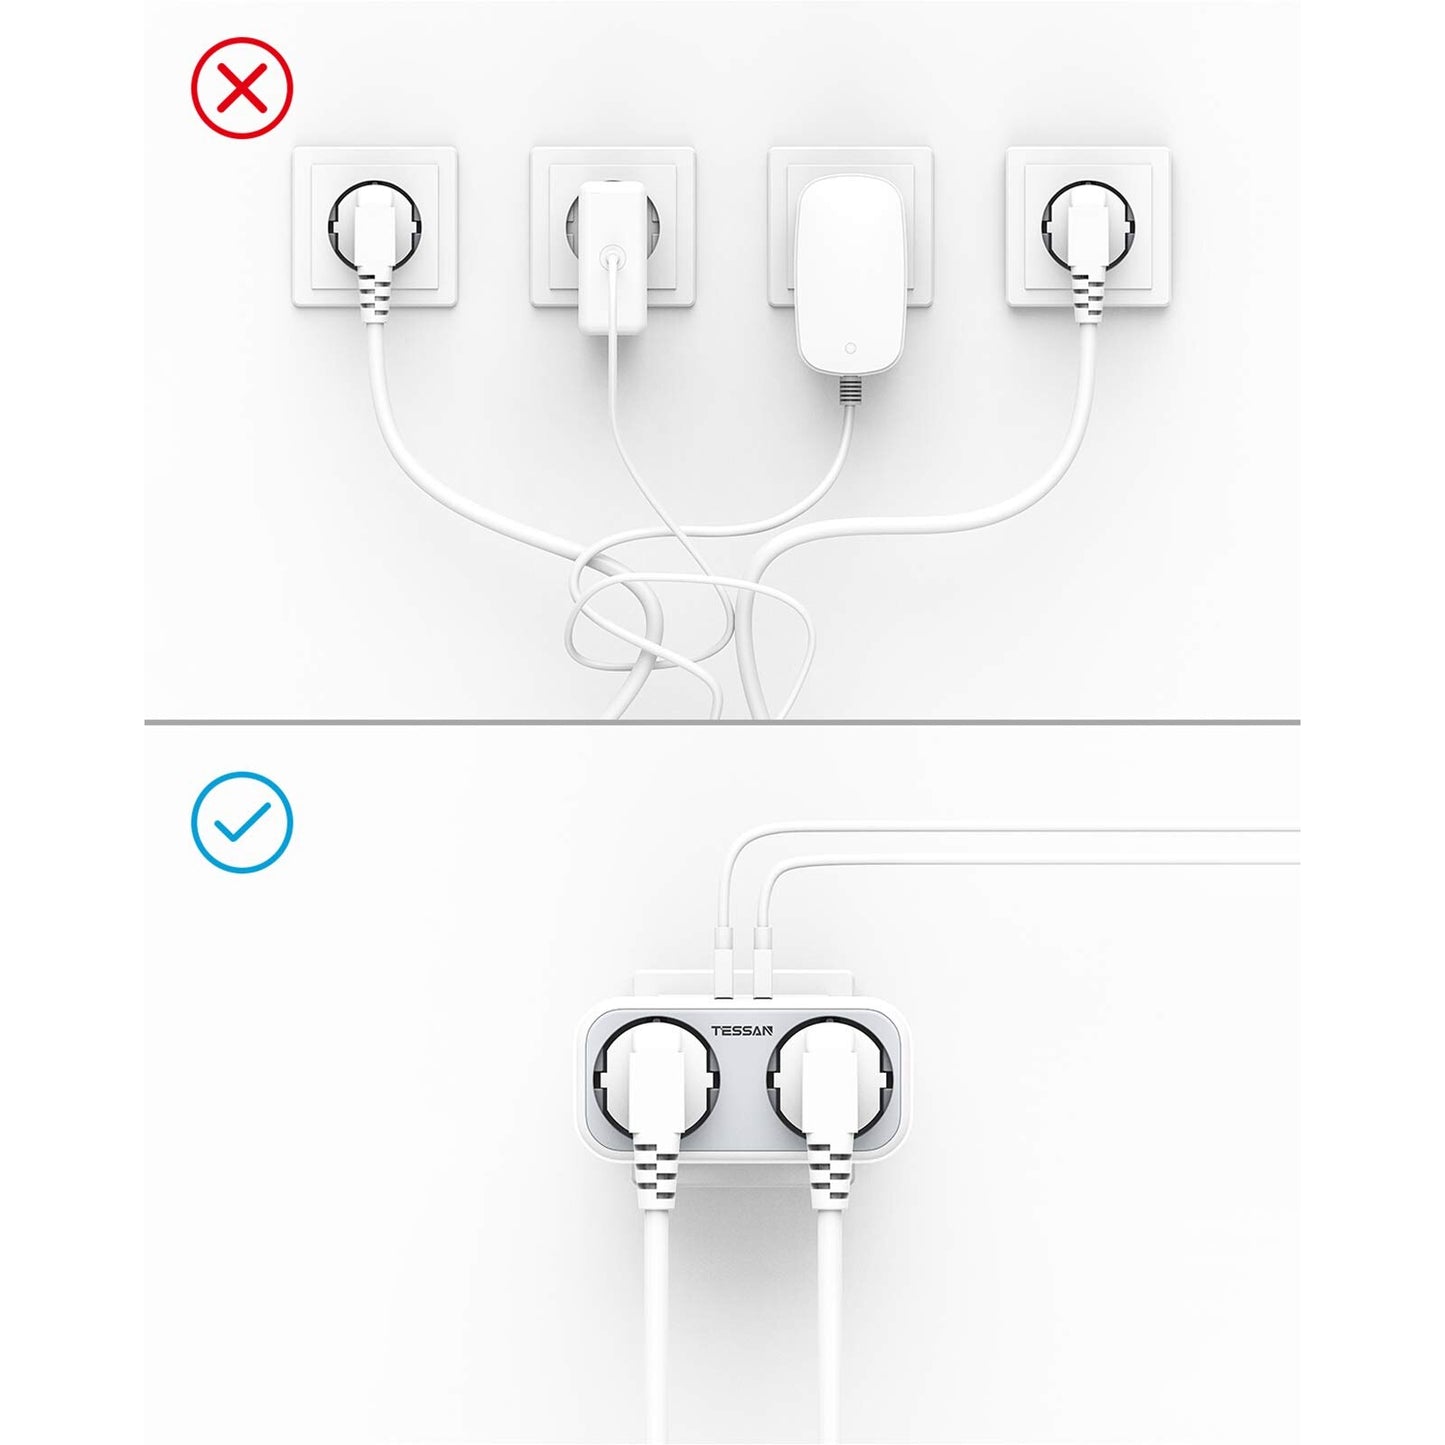 TESSAN 4 in 1 Wall Adapter